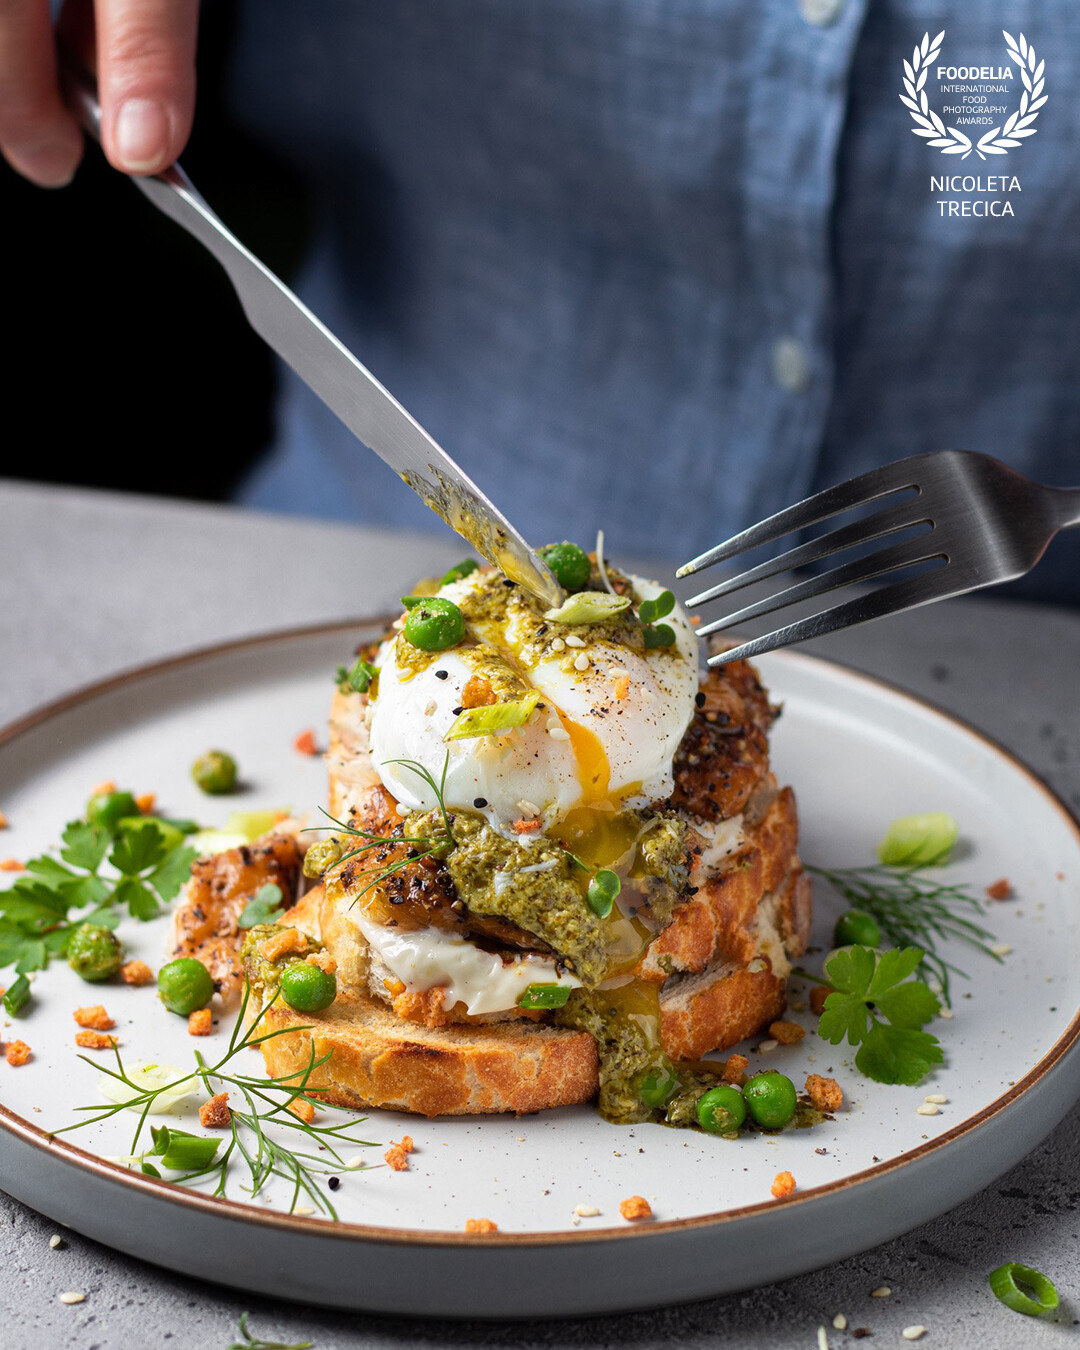 Food styling challenge and creating a perfect breakfast moment with toast, smoked mackerel and poached egg.